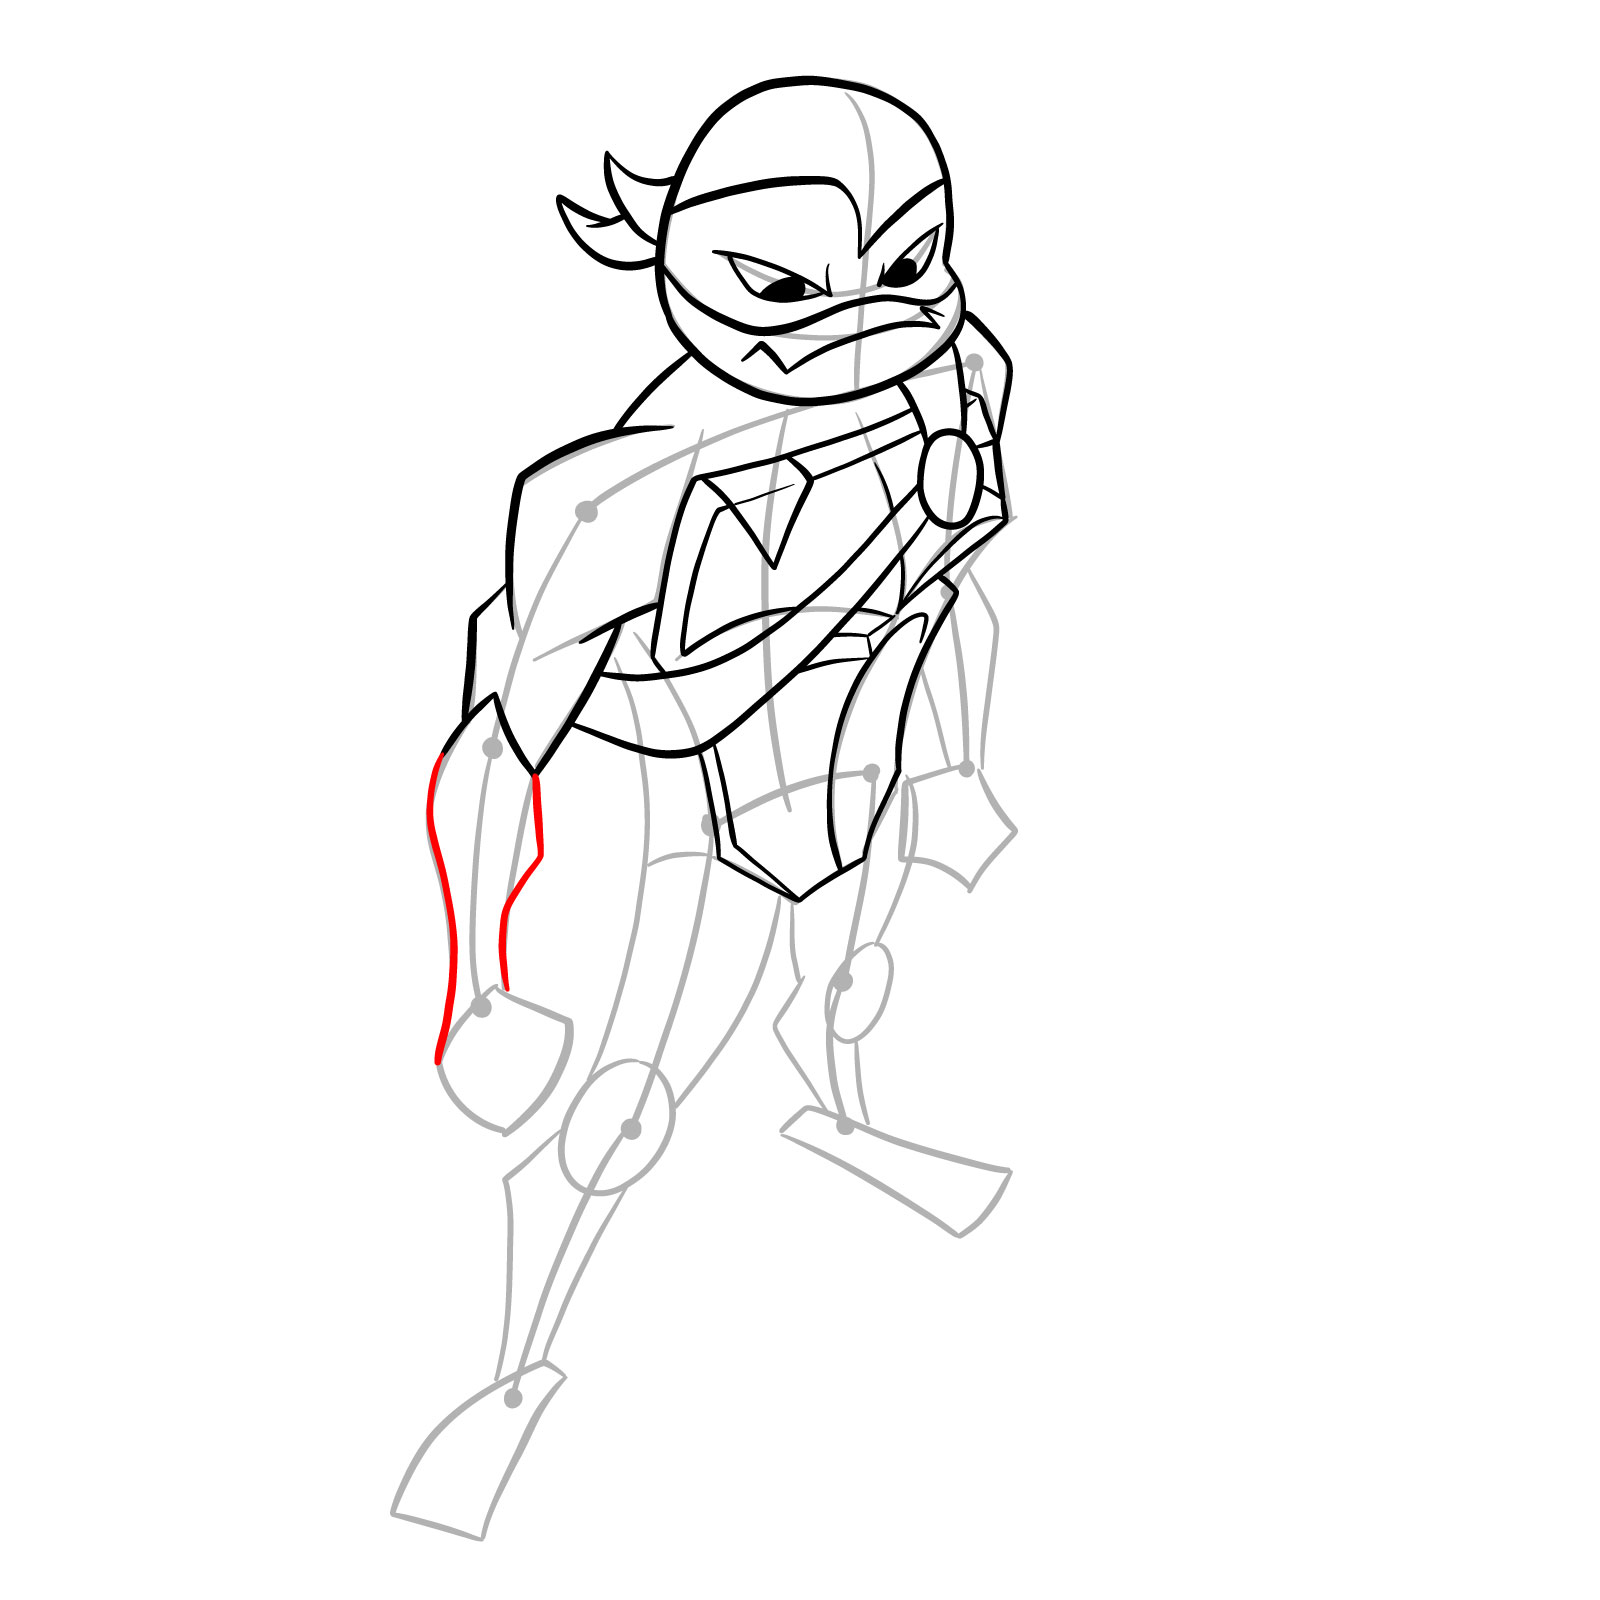 How to draw Mikey in Hamato Ninpō state - step 19